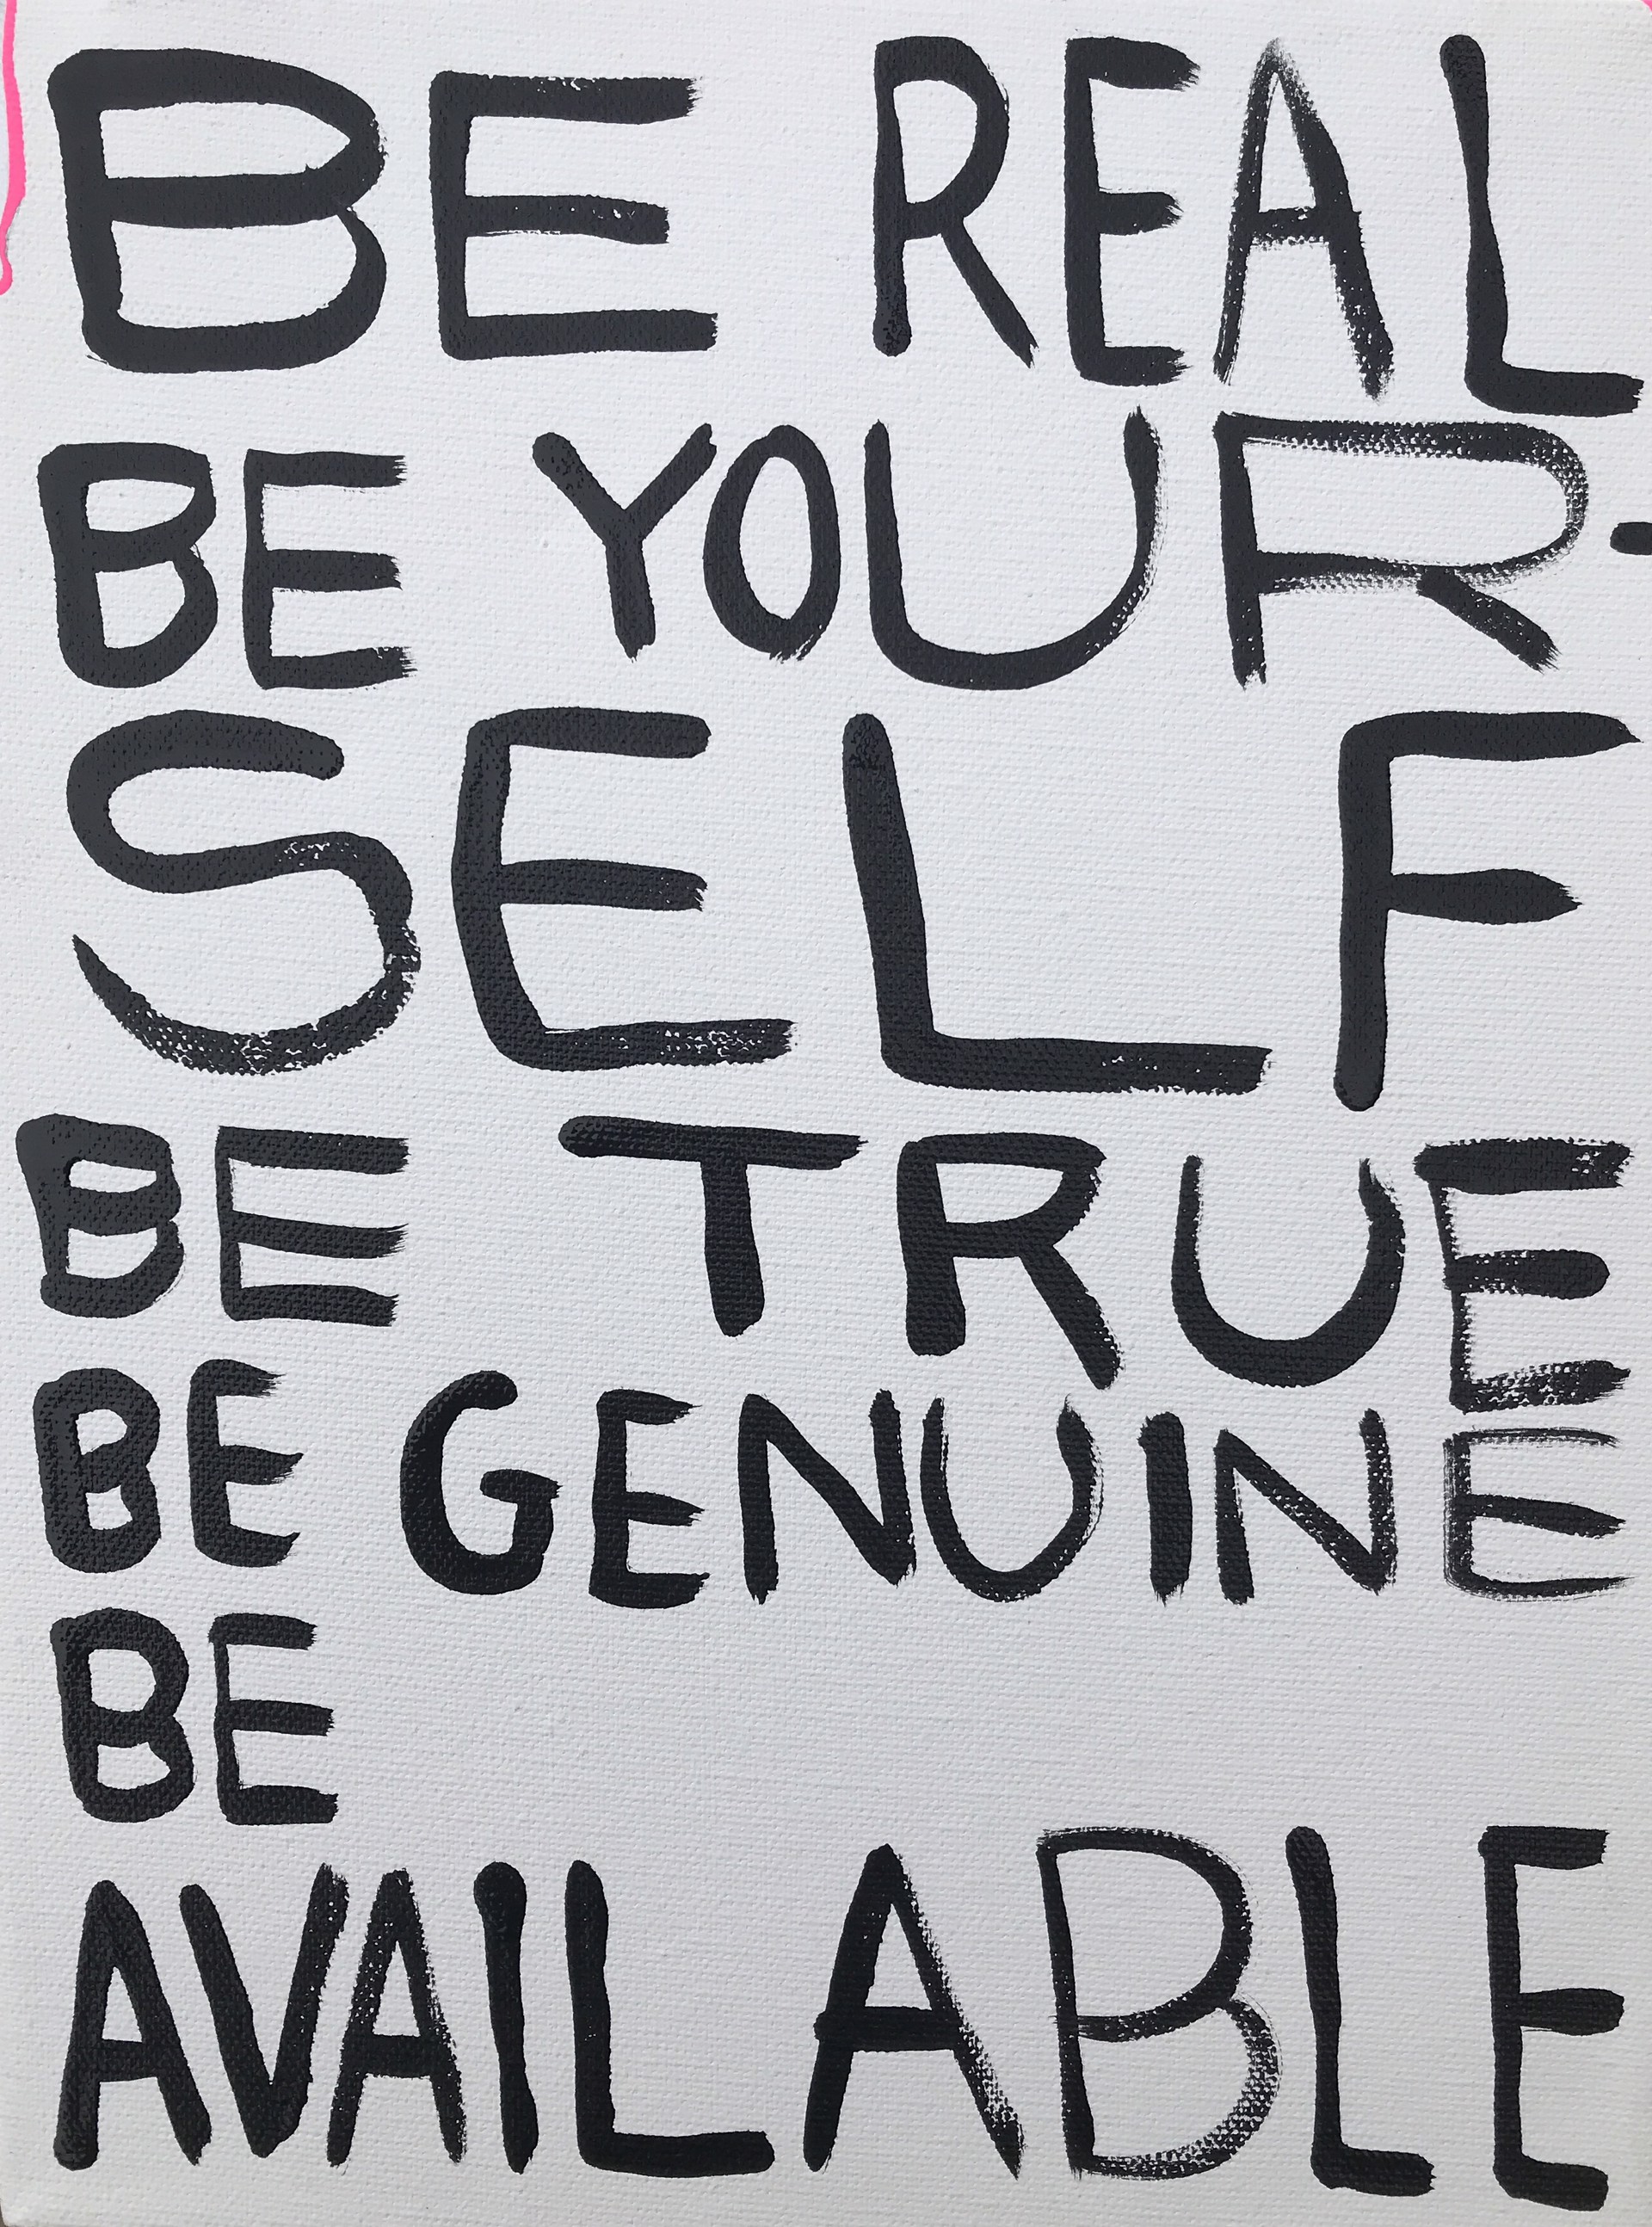 Be Real, Be Yourself… by Mikey Kettinger